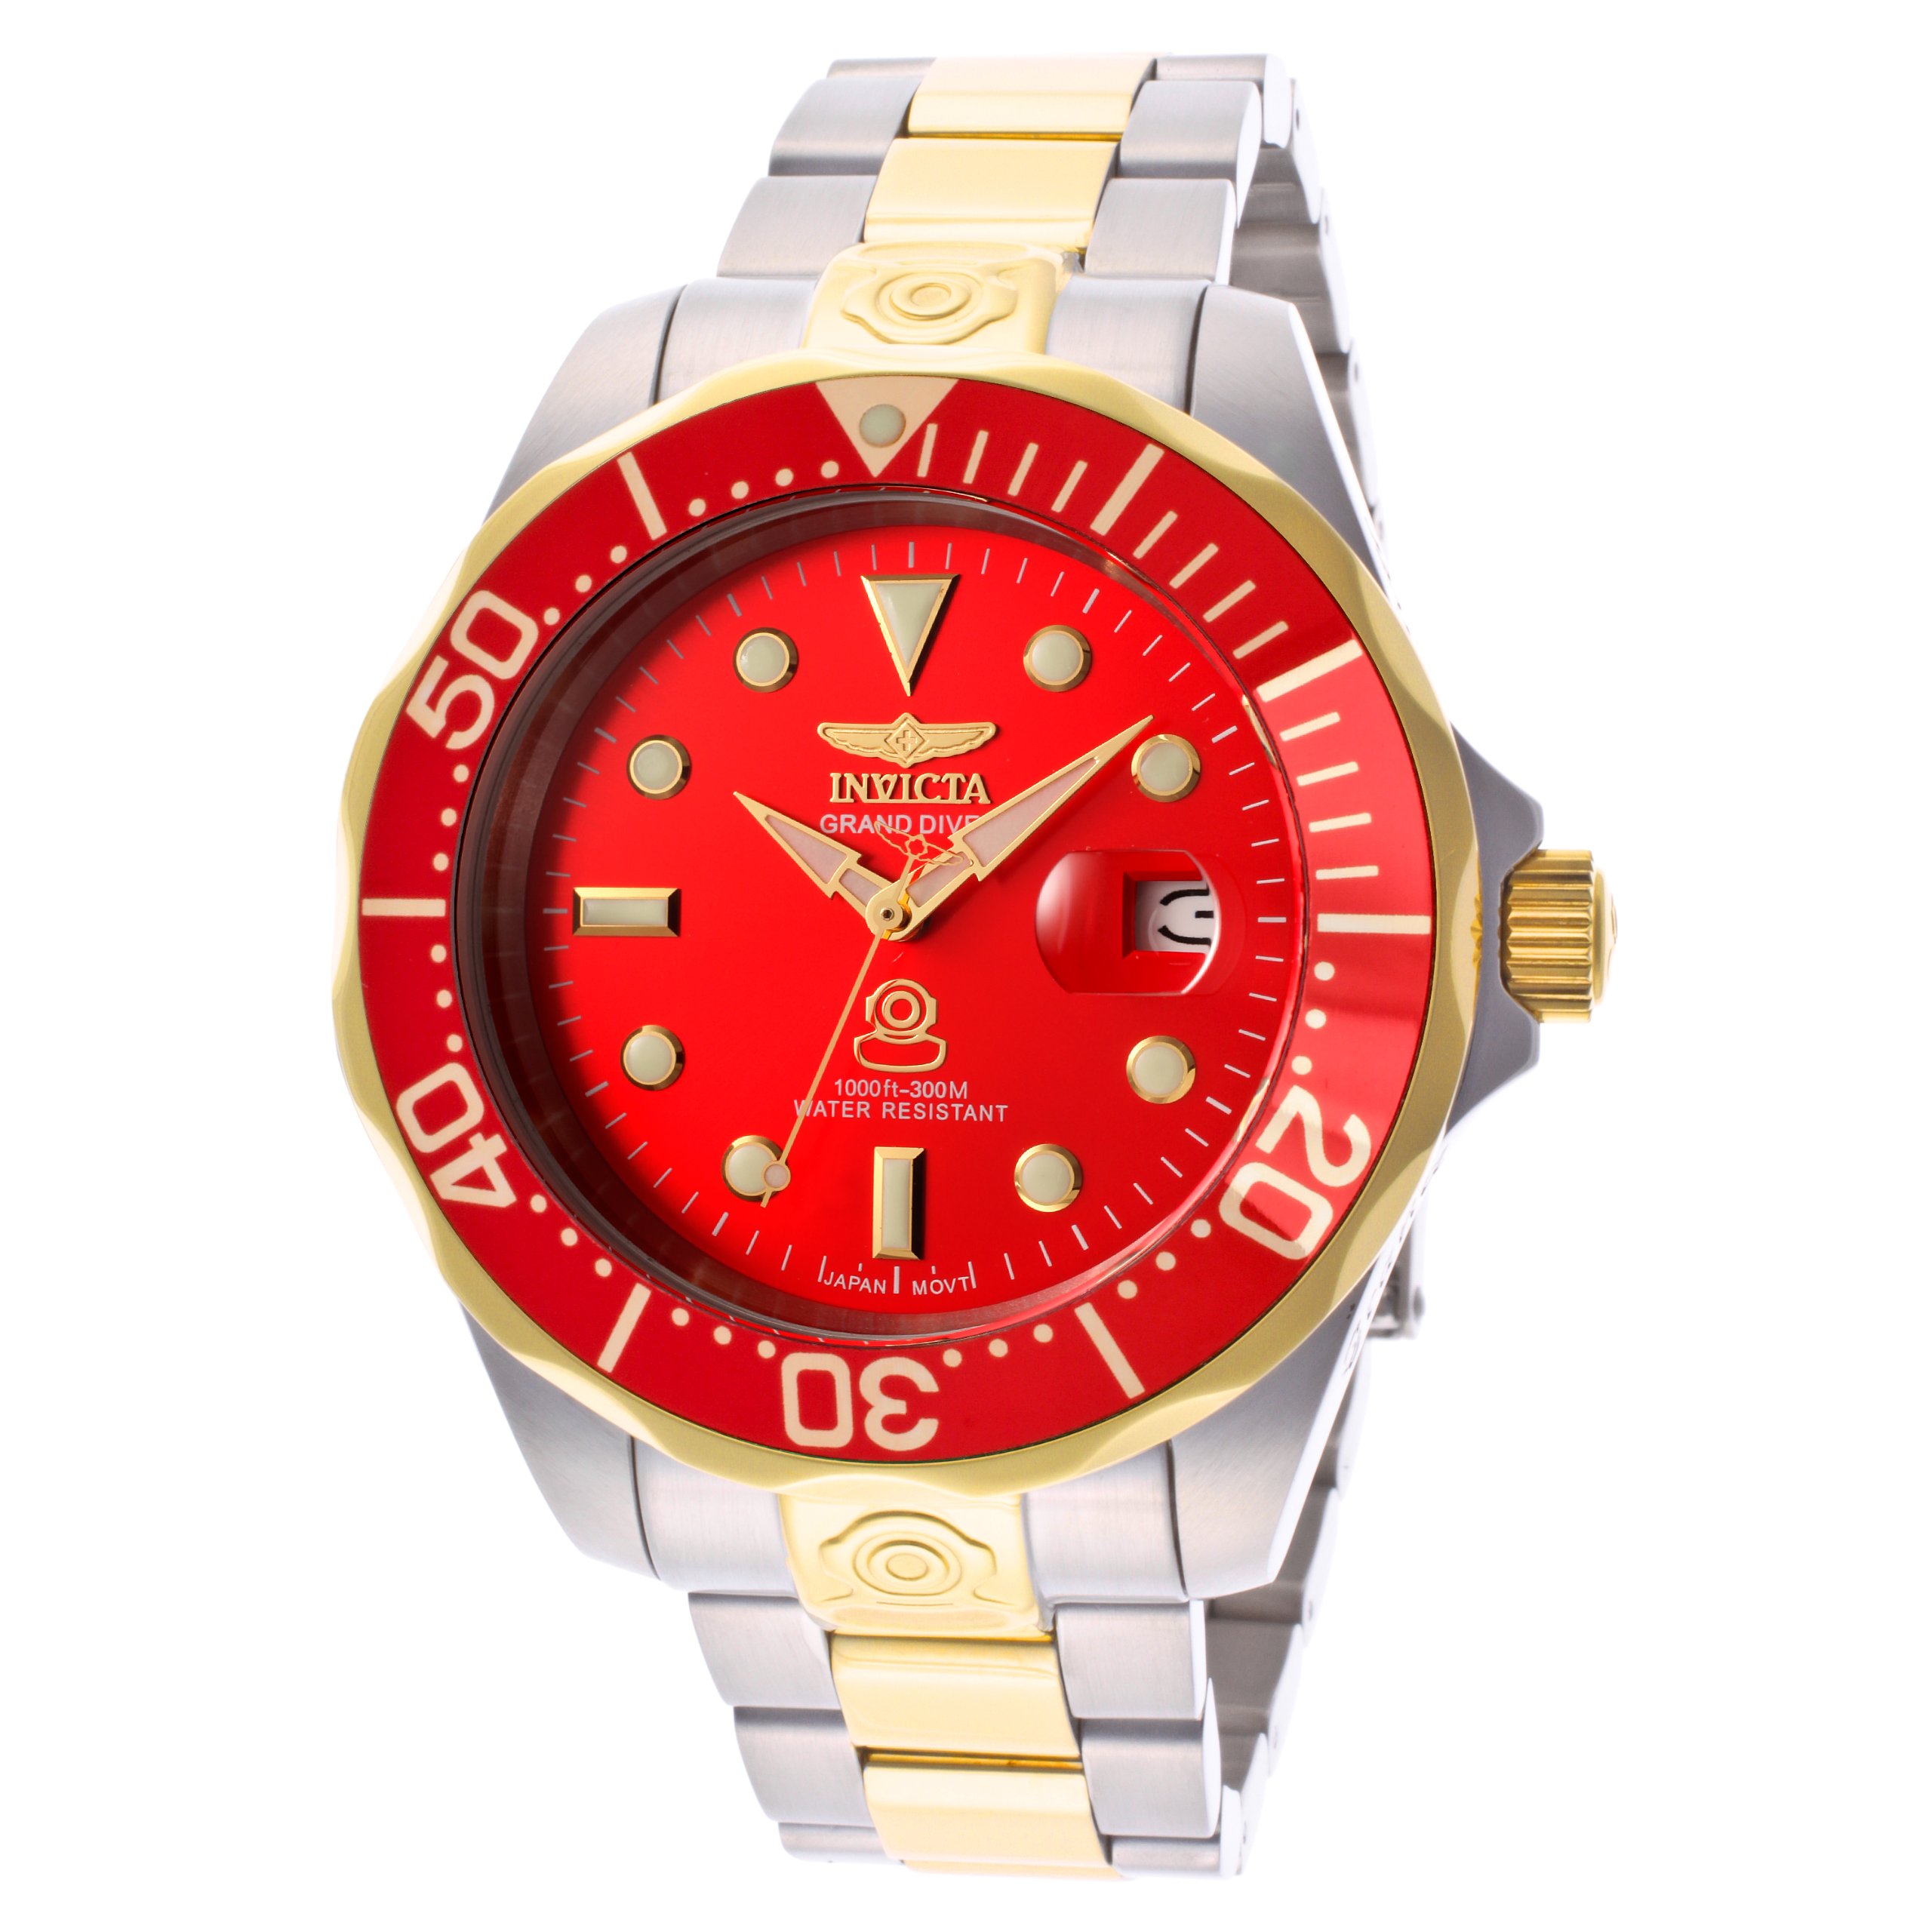 Invicta Men's 13927 Pro Diver Automatic Red Dial Two Tone Stainless Steel Watch